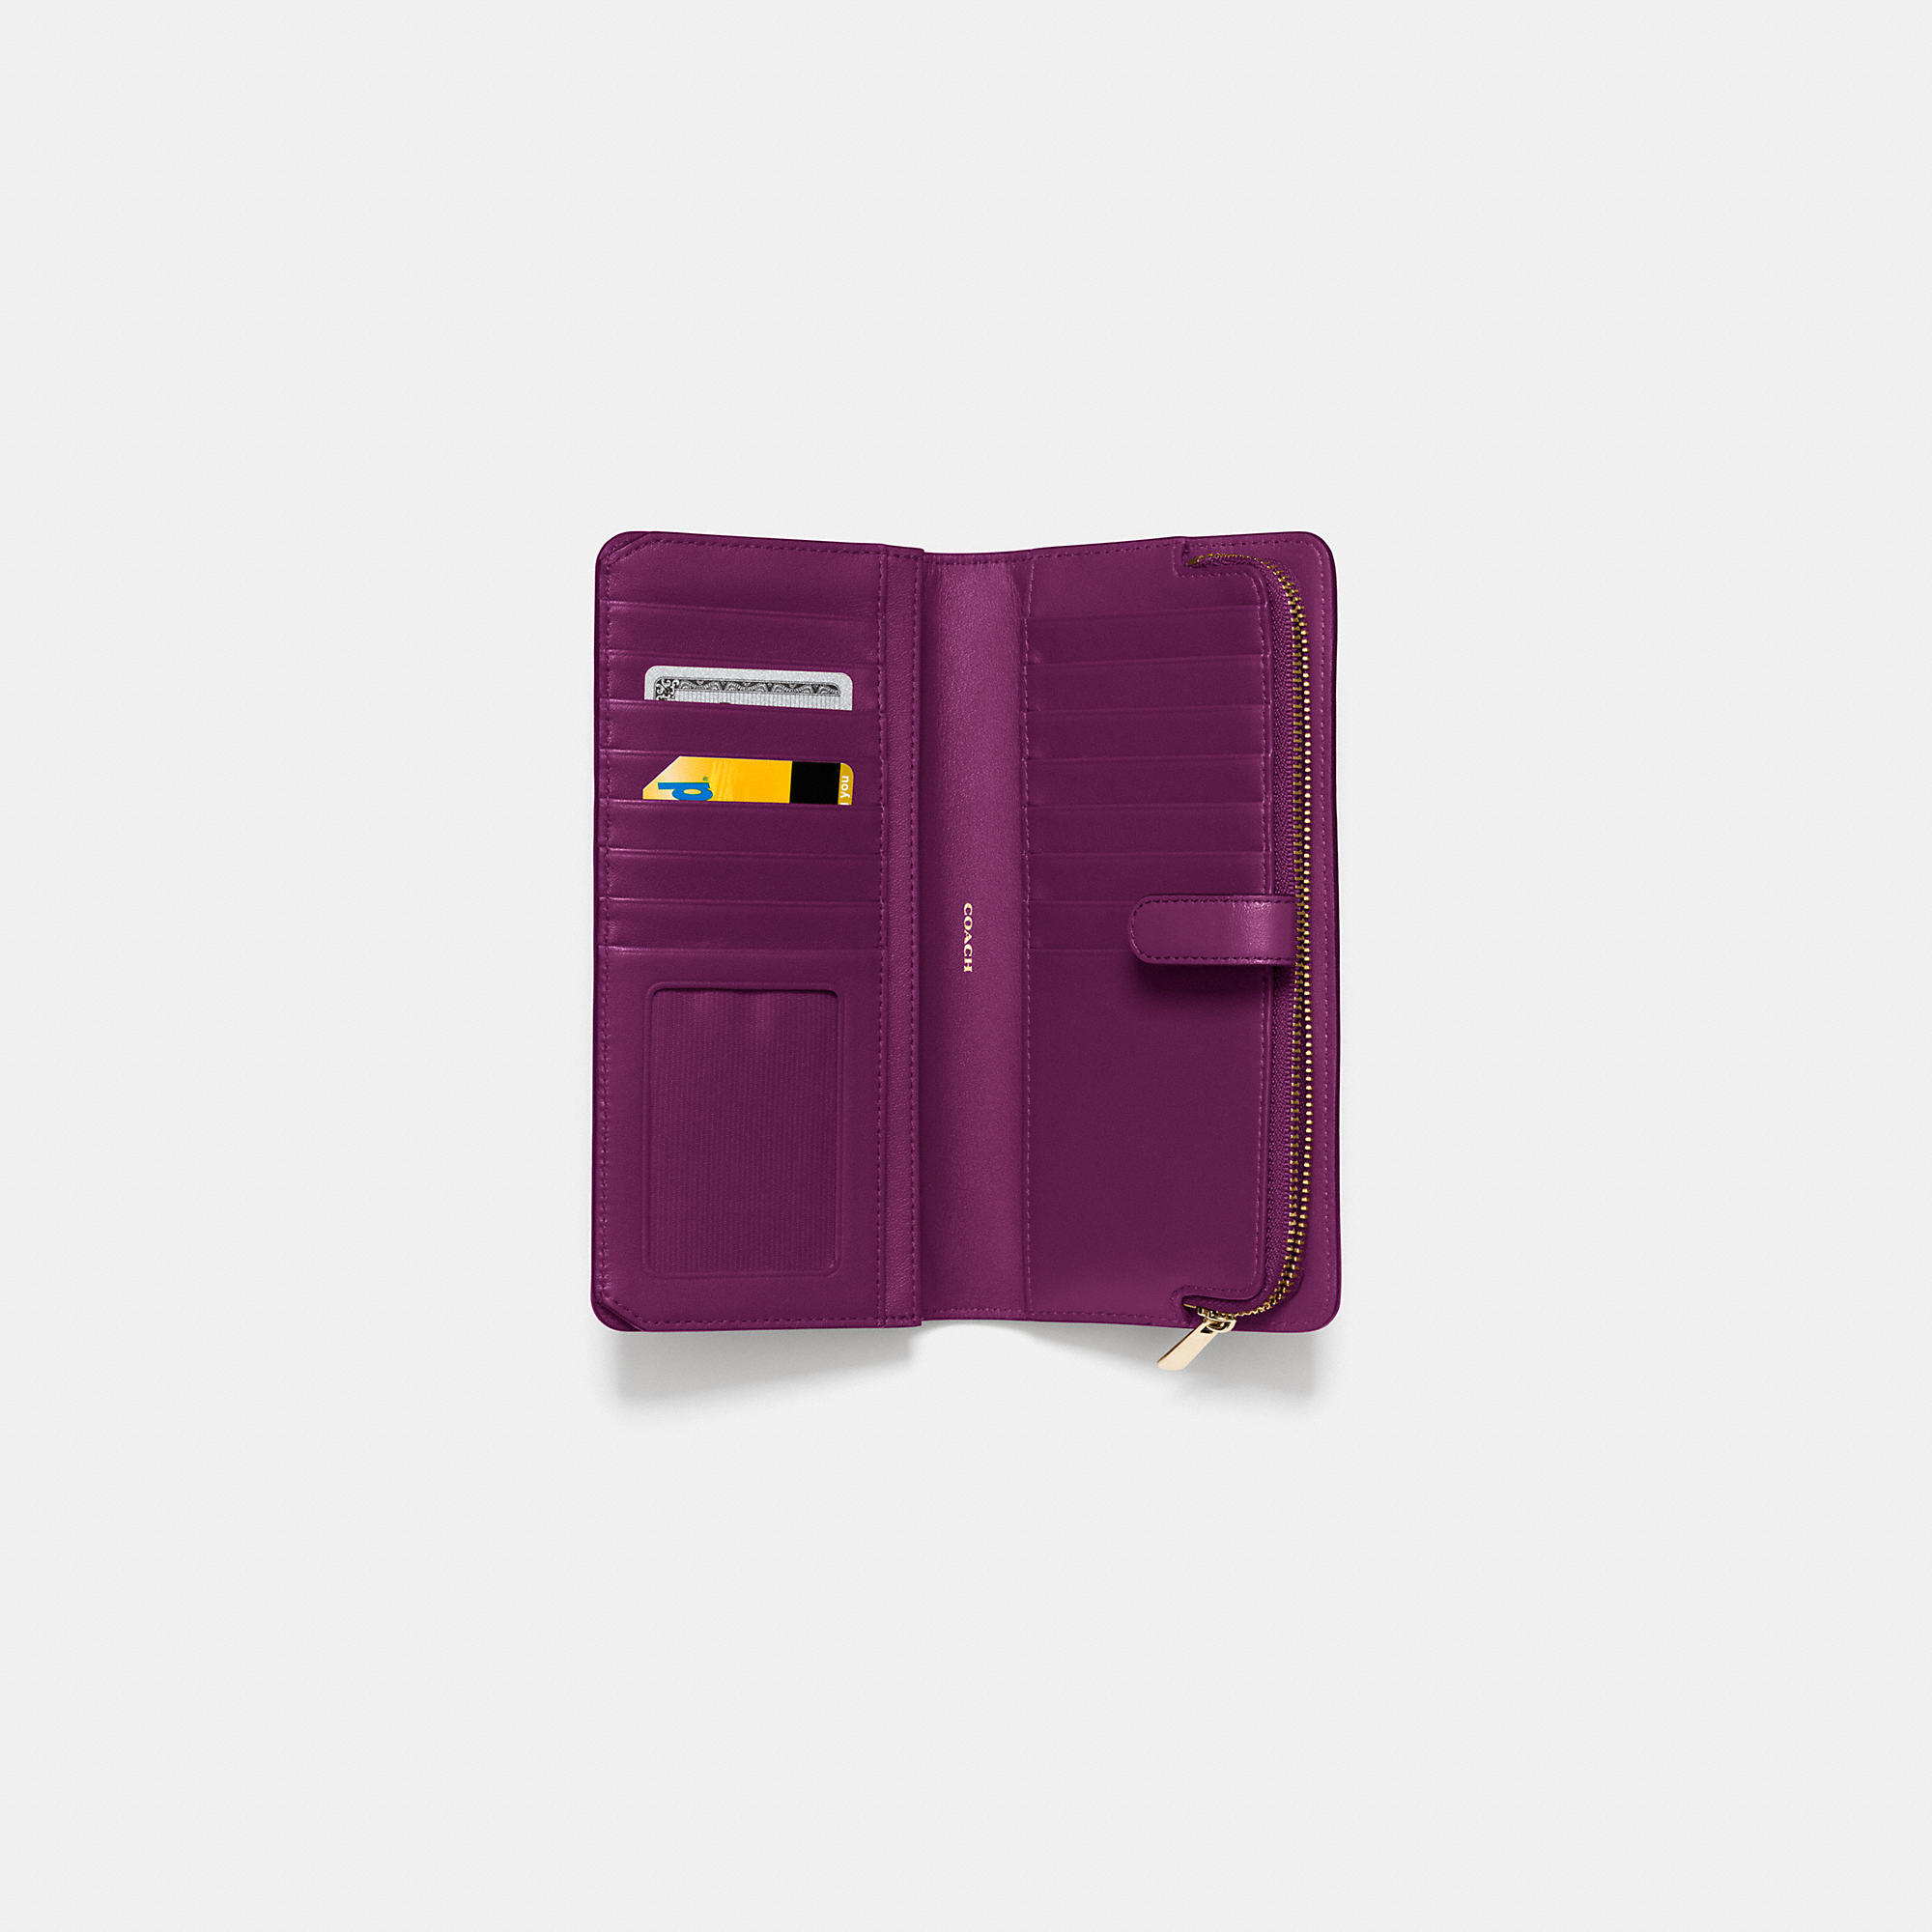 Hermès - Authenticated Constance Slim Wallet - Leather Purple Plain for Women, Never Worn, with Tag